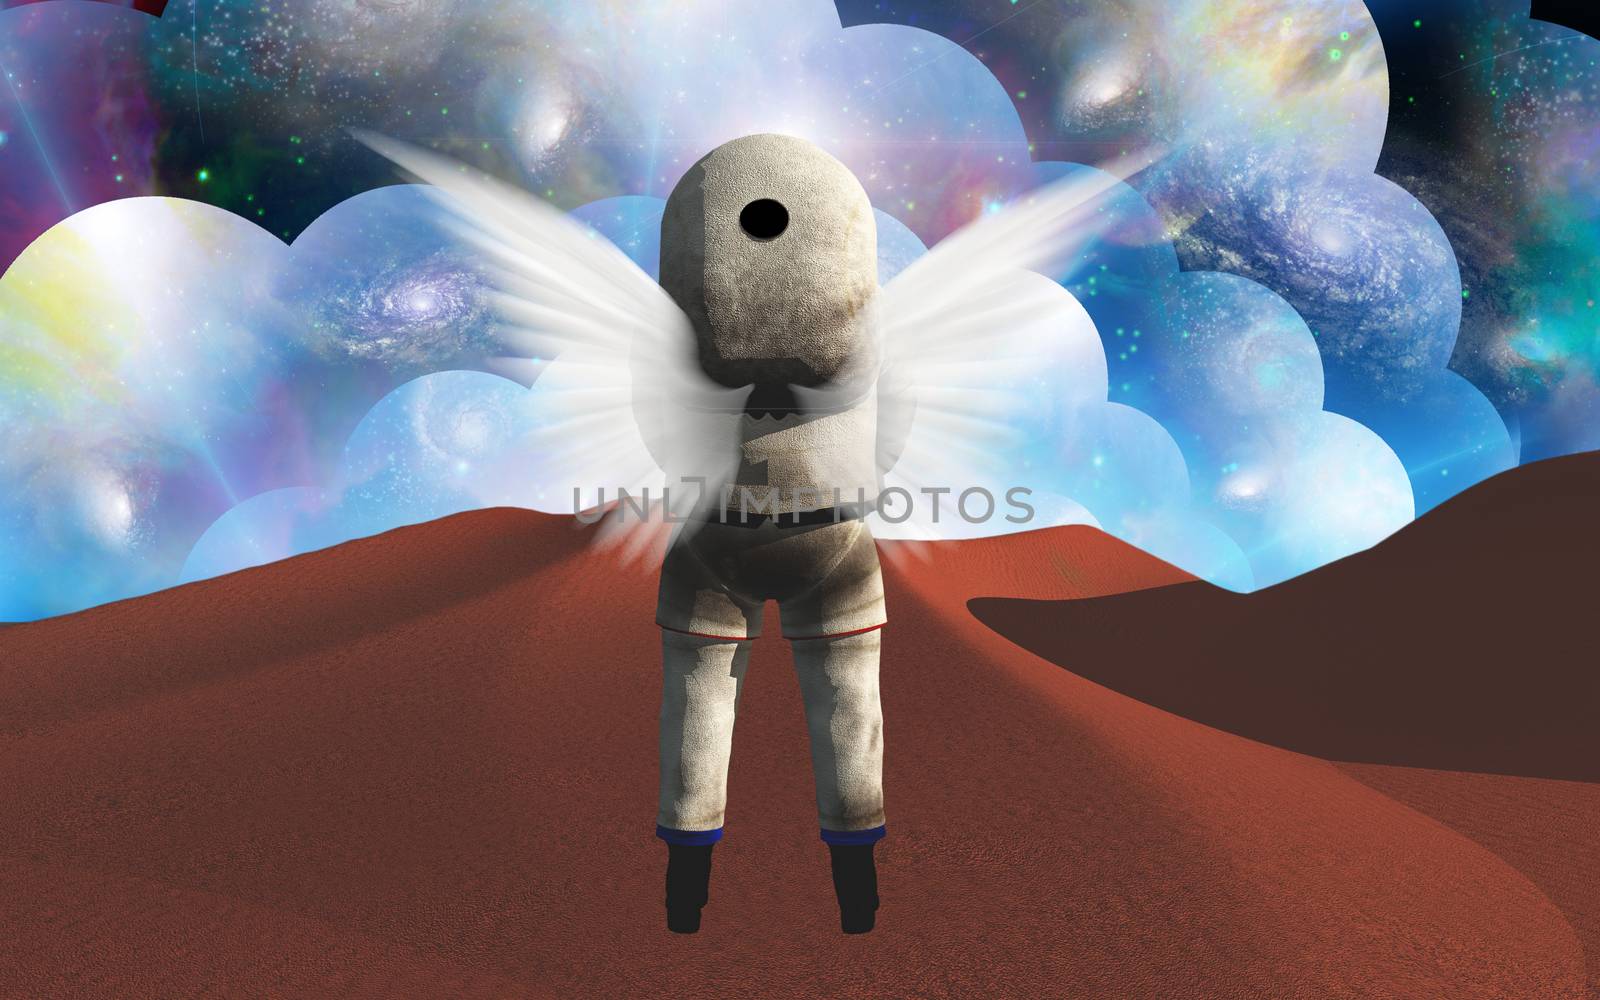 Winged astronaut on red planet by applesstock